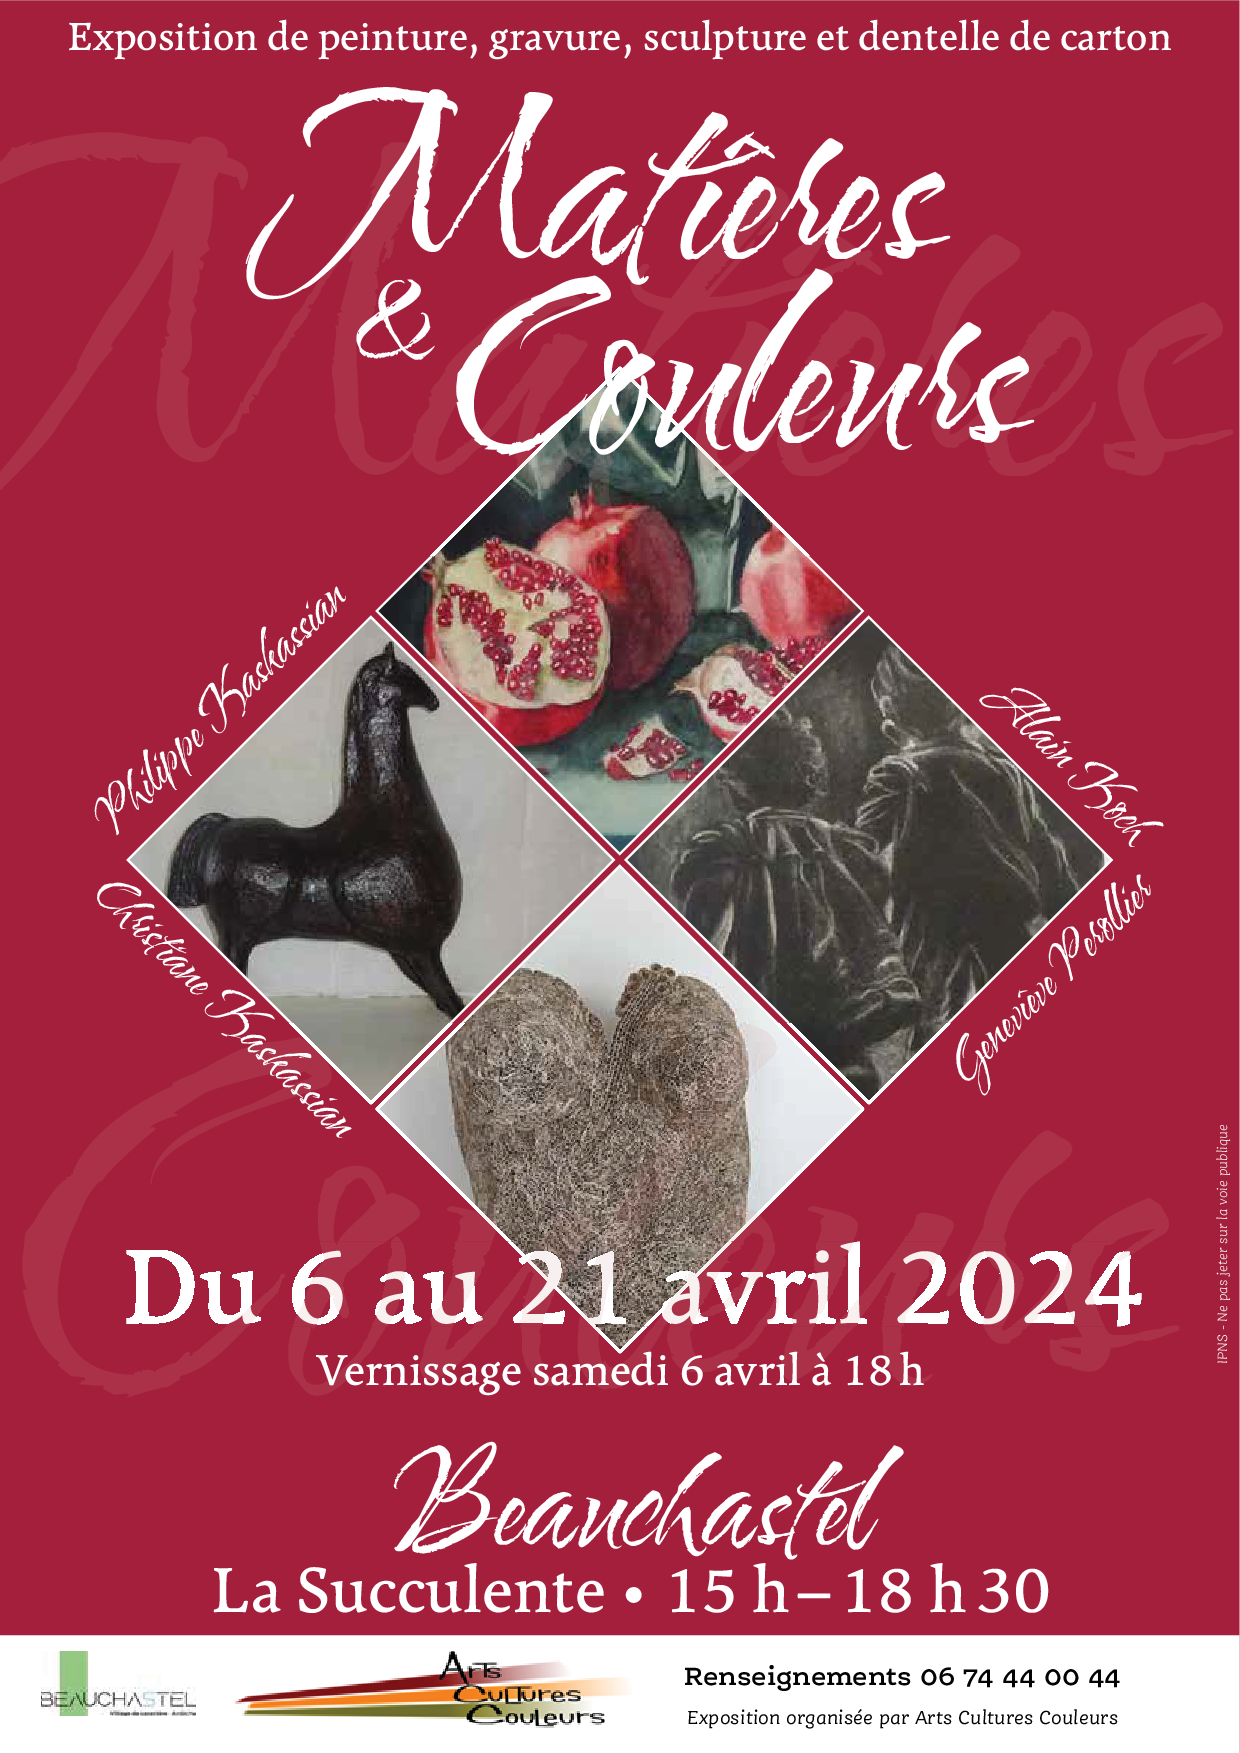 Events…Put it in your diary : Exposition Matières & Couleurs